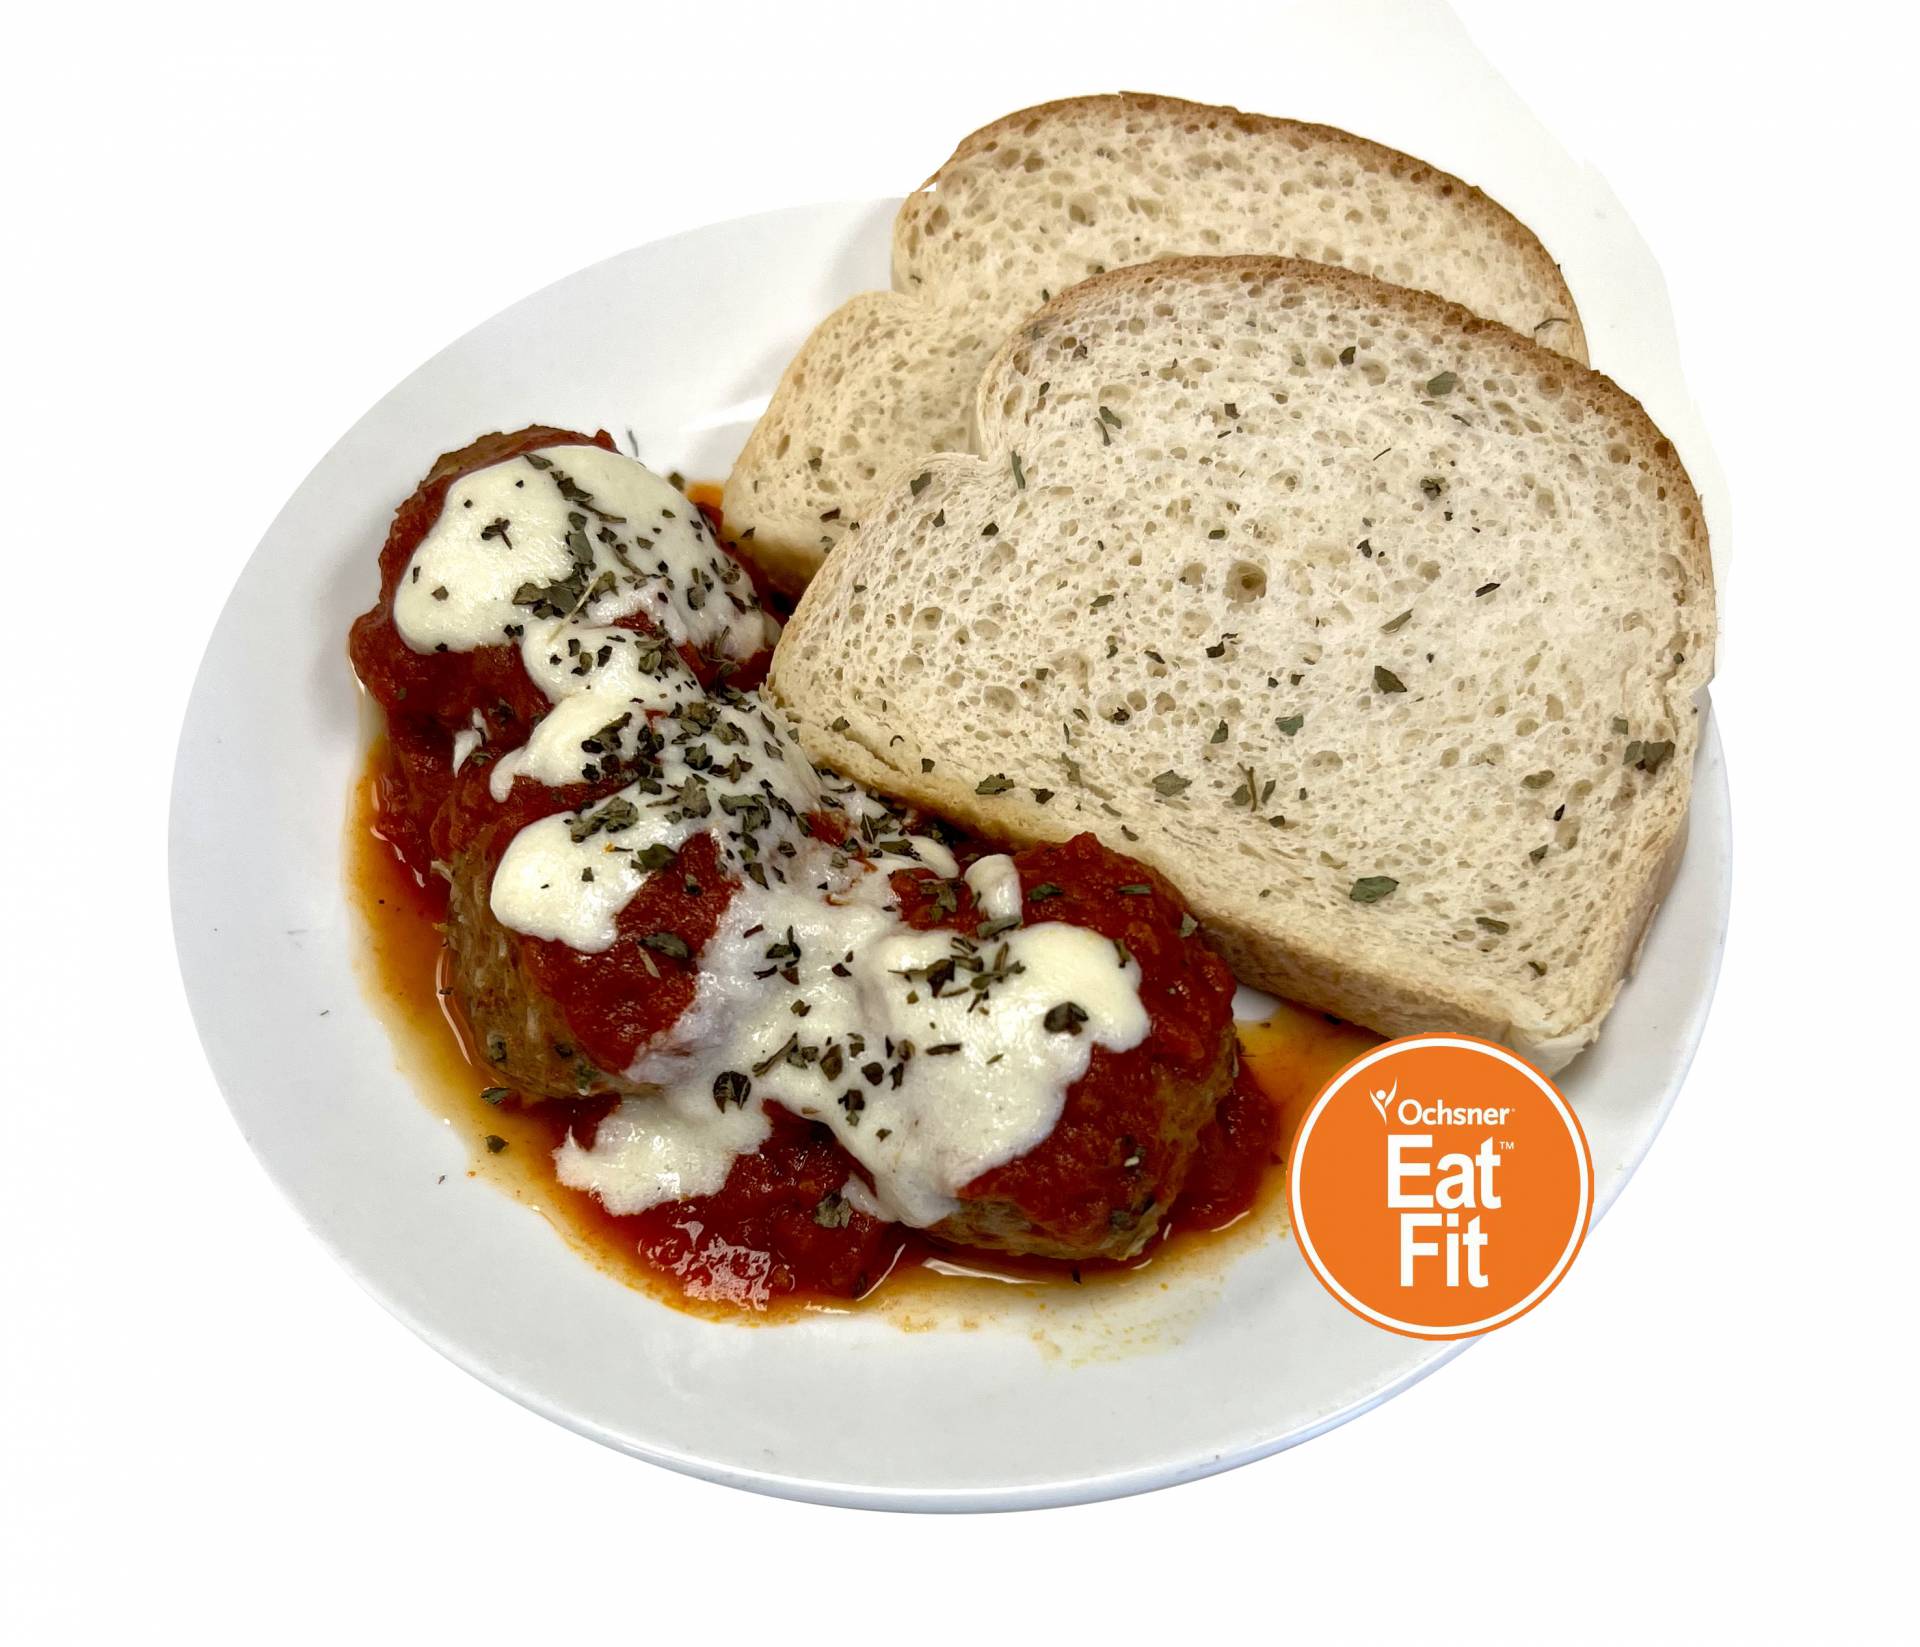 Italian Turkey Meatballs with Red Sauce and Sliced Bread - Keto